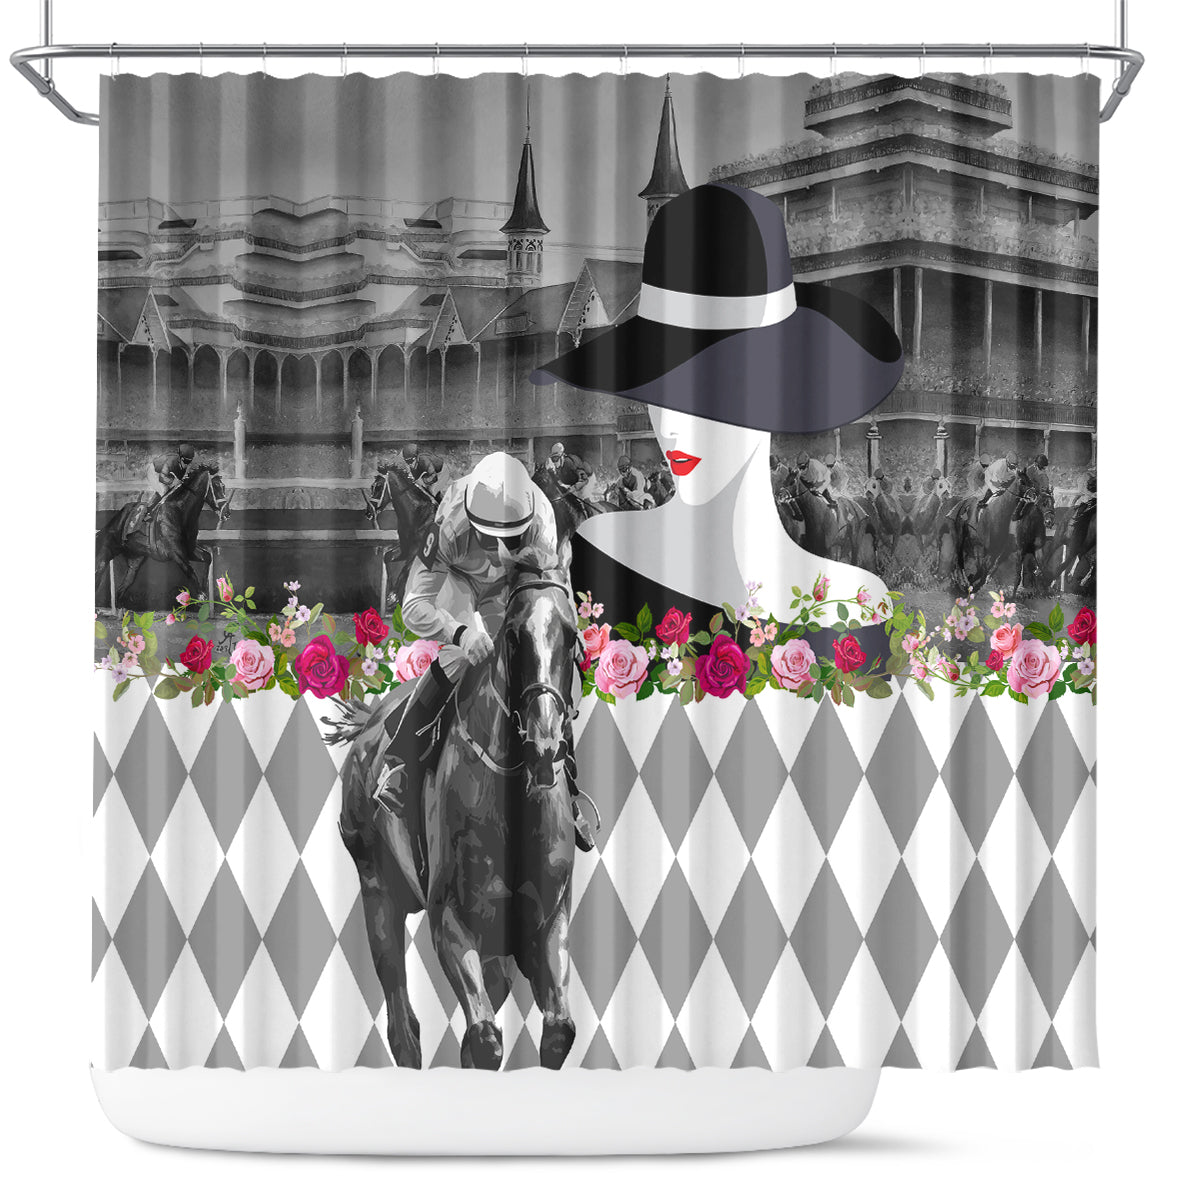 Kentucky Racing Horses Derby Hat Lady Shower Curtain Churchill Downs and Roses Grayscale